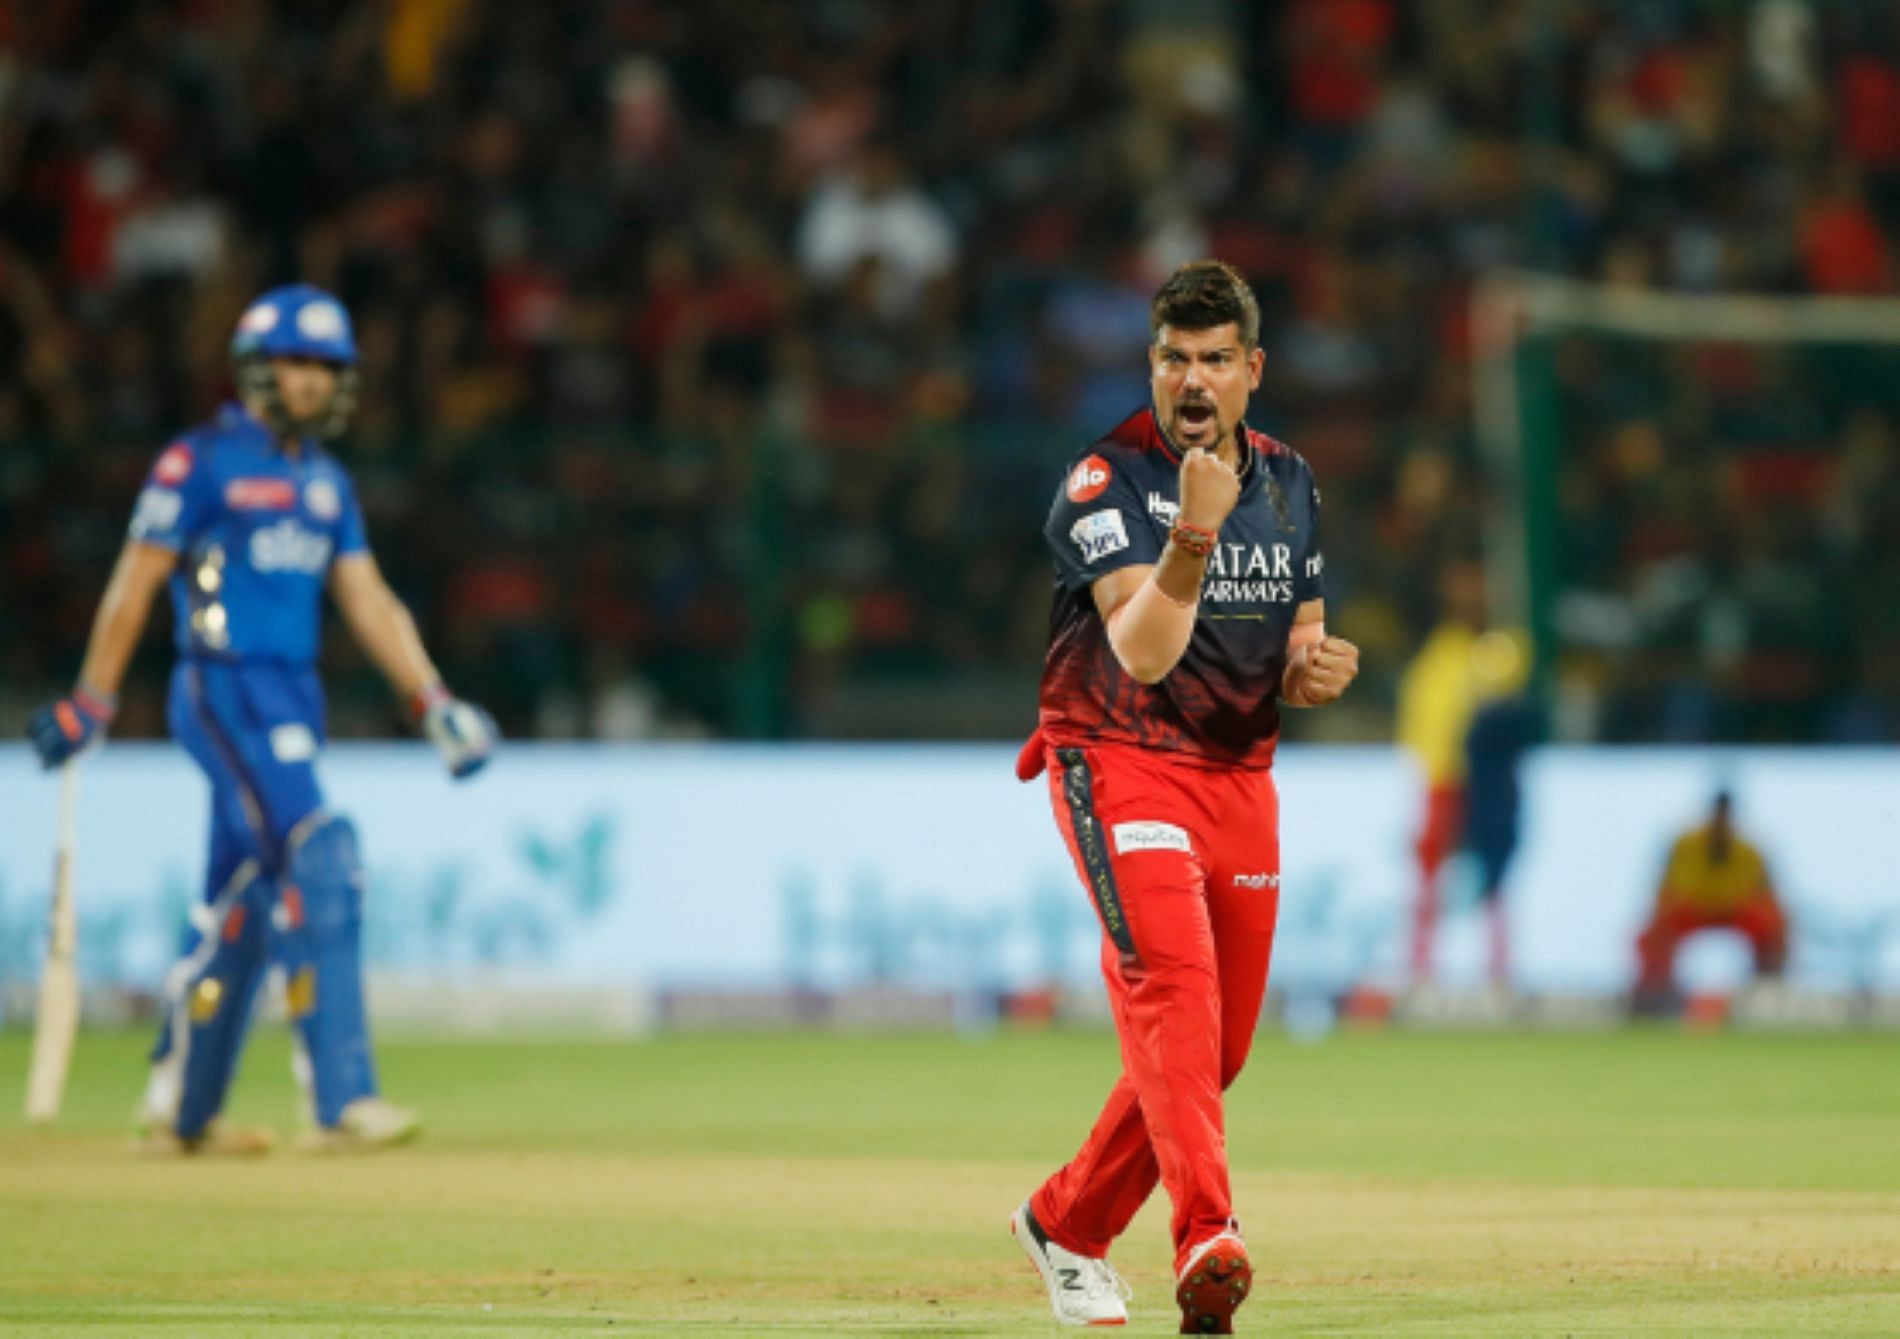 Relying on Karn Sharma as the lone leg-spin option could be risky for RCB.